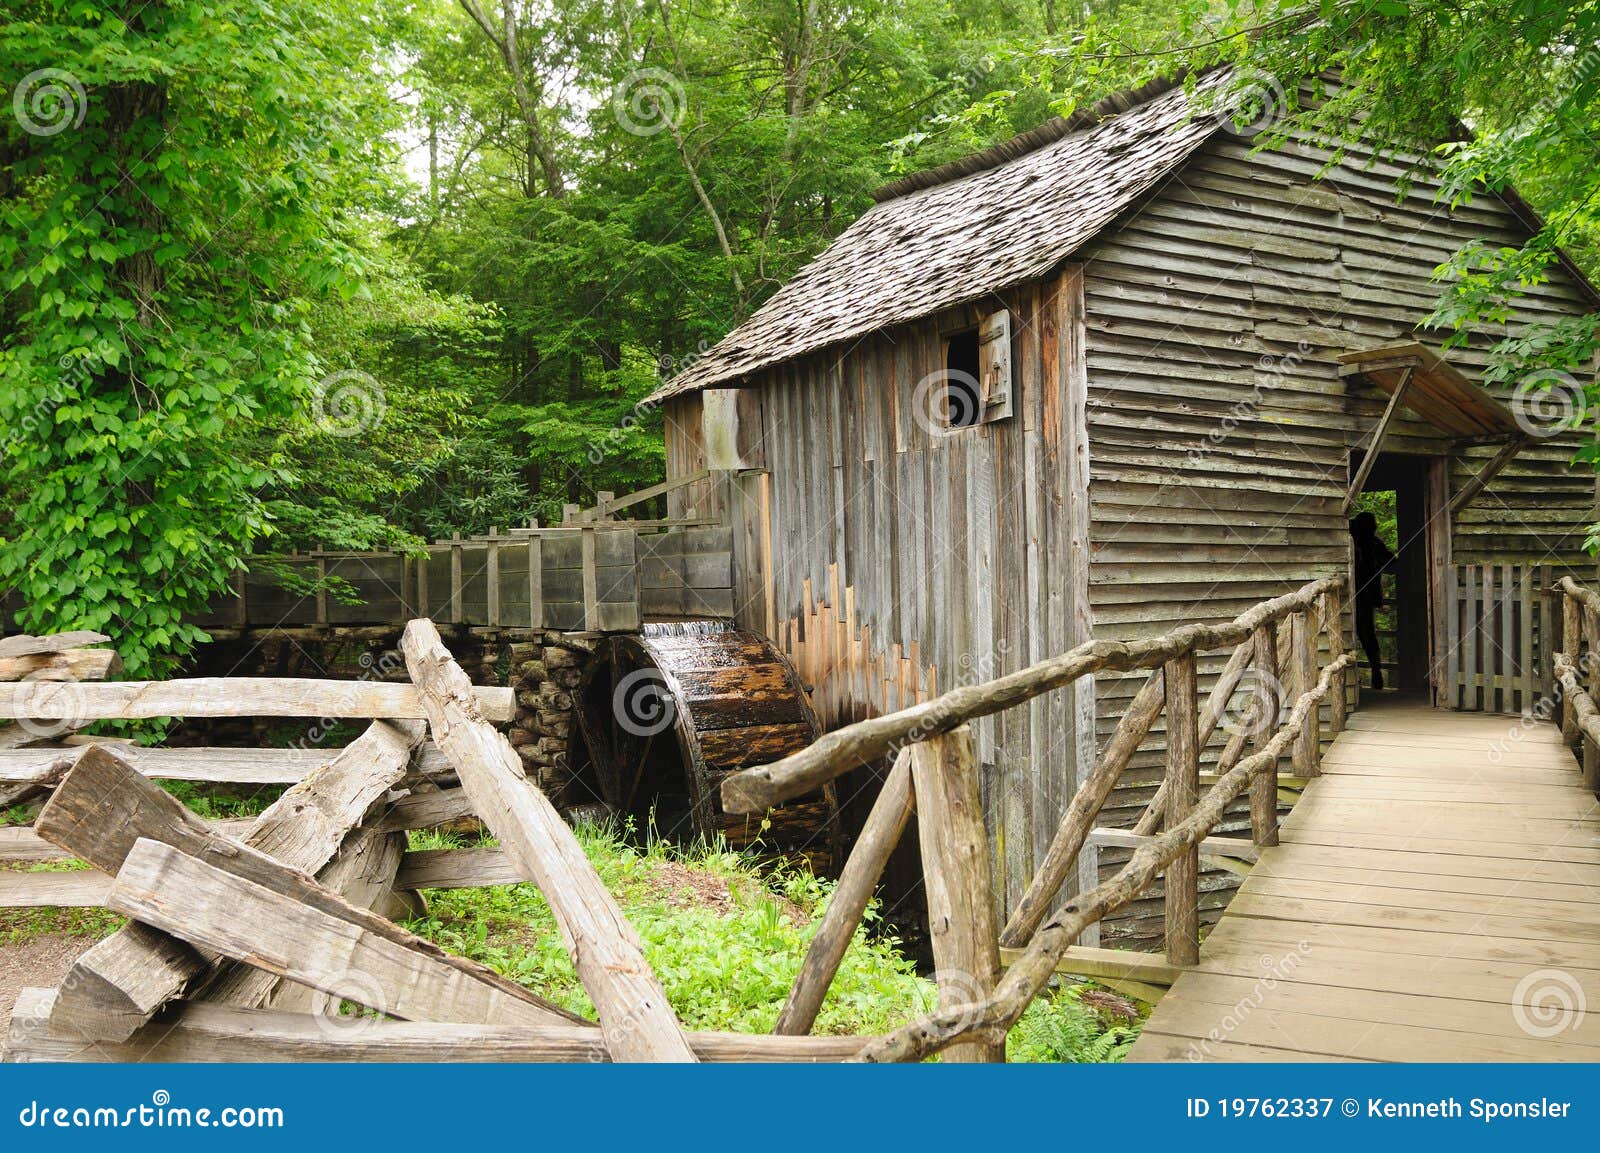 cades cove gristmill